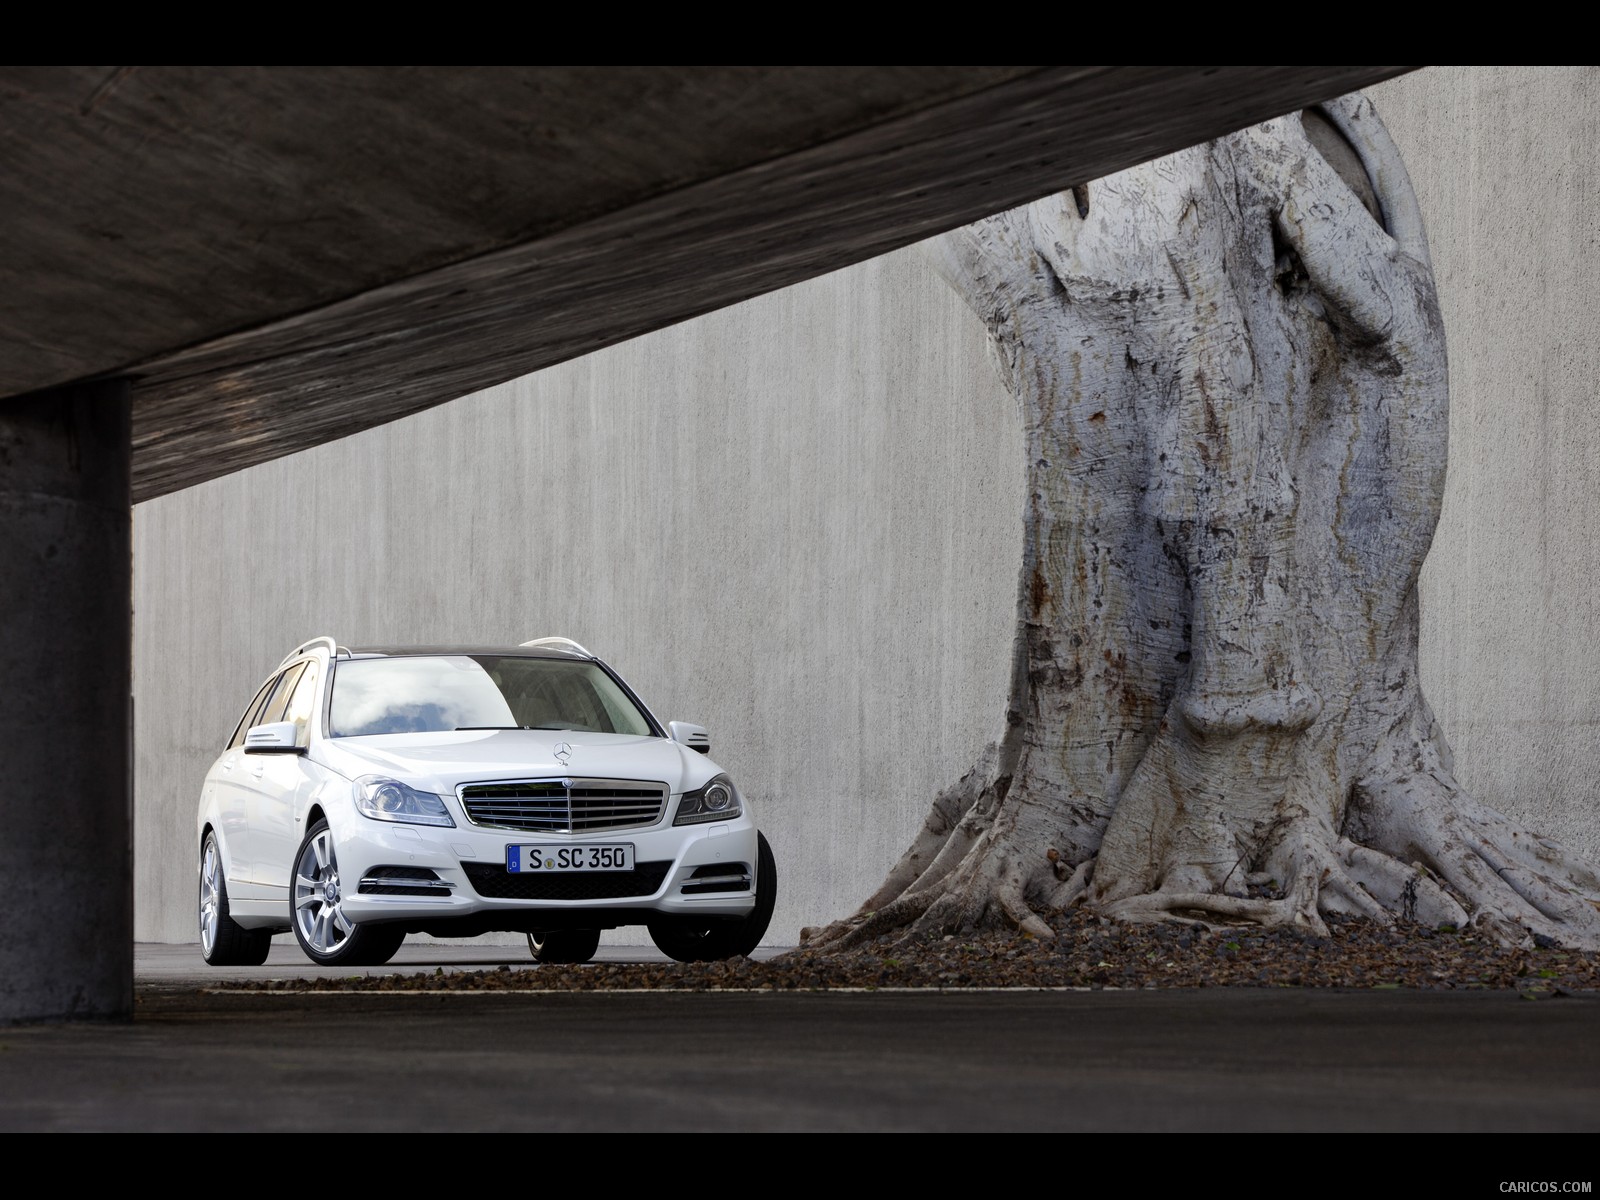 Mercedes-Benz C-Class Estate (2012)  - Front Angle , #3 of 36